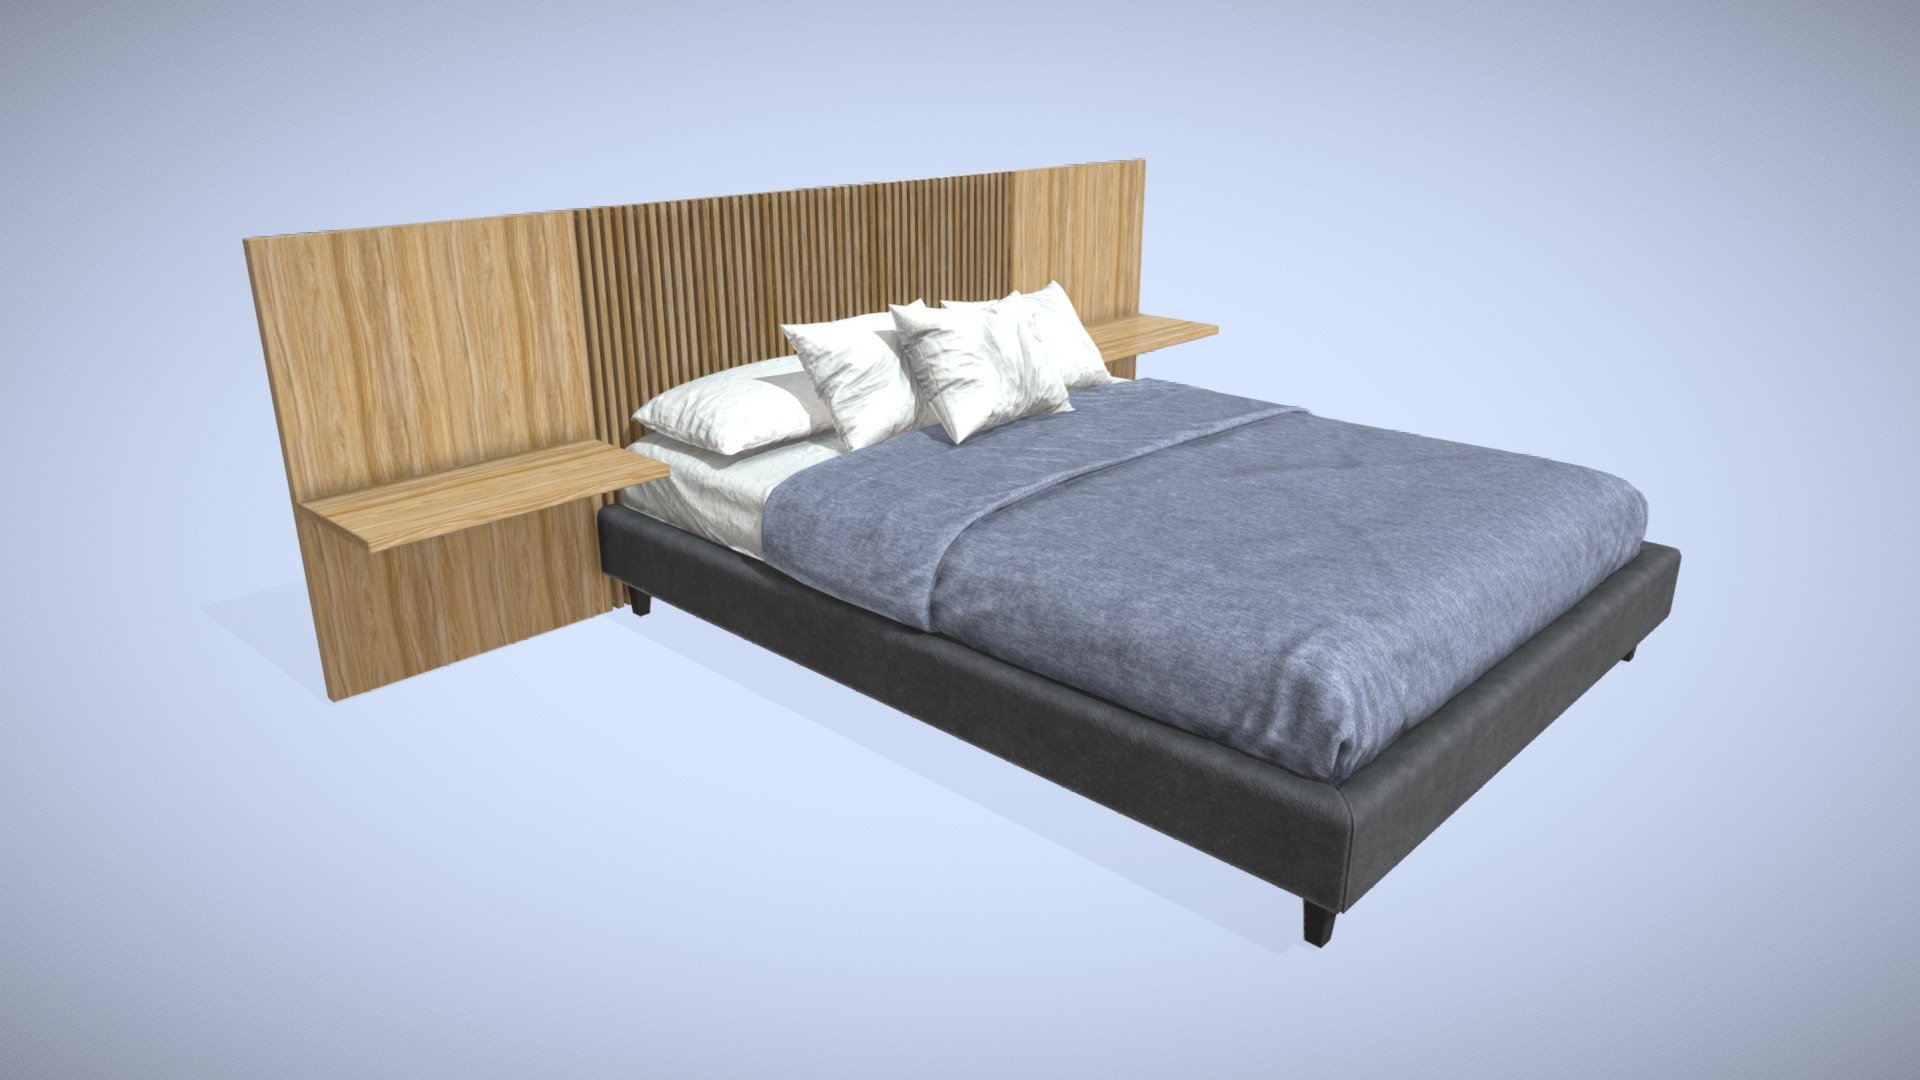 **This is a 3D model of a Bed and Headboard with Vertical Design Low Poly **




Made in Blender 3.x (PBR Materials) and Rendering Cycles.

Main rendering made in Blender 3.x + Cycles using some HDR Environment Textures Images for lighting which is NOT provided in the package!

What does this package include?




3D Modeling of a Headboard with Vertical Design

4K Textures (Base Color, Normal Map, Metallic ,Roughness, Ambient Occlusion)

Important notes




File format included - (Blend, FBX, OBJ, GLB, STL)

Texture size - 4K

Uvs non - overlapping

Polygon: Quads

Centered at 0,0,0

In some formats may be needed to reassign textures and add HDR Environment Textures Images for lighting.

Not lights include

No special plugin needed to open the scene.

If you like my work, please leave your comment and like, it helps me a lot to create new content. If you have any questions or changes about colors or another thing, you can contact me at we3domodel@gmail.com - Bed and Headboard with Vertical Design Low Poly - Buy Royalty Free 3D model by We3Do (@we3DoModel) 3d model